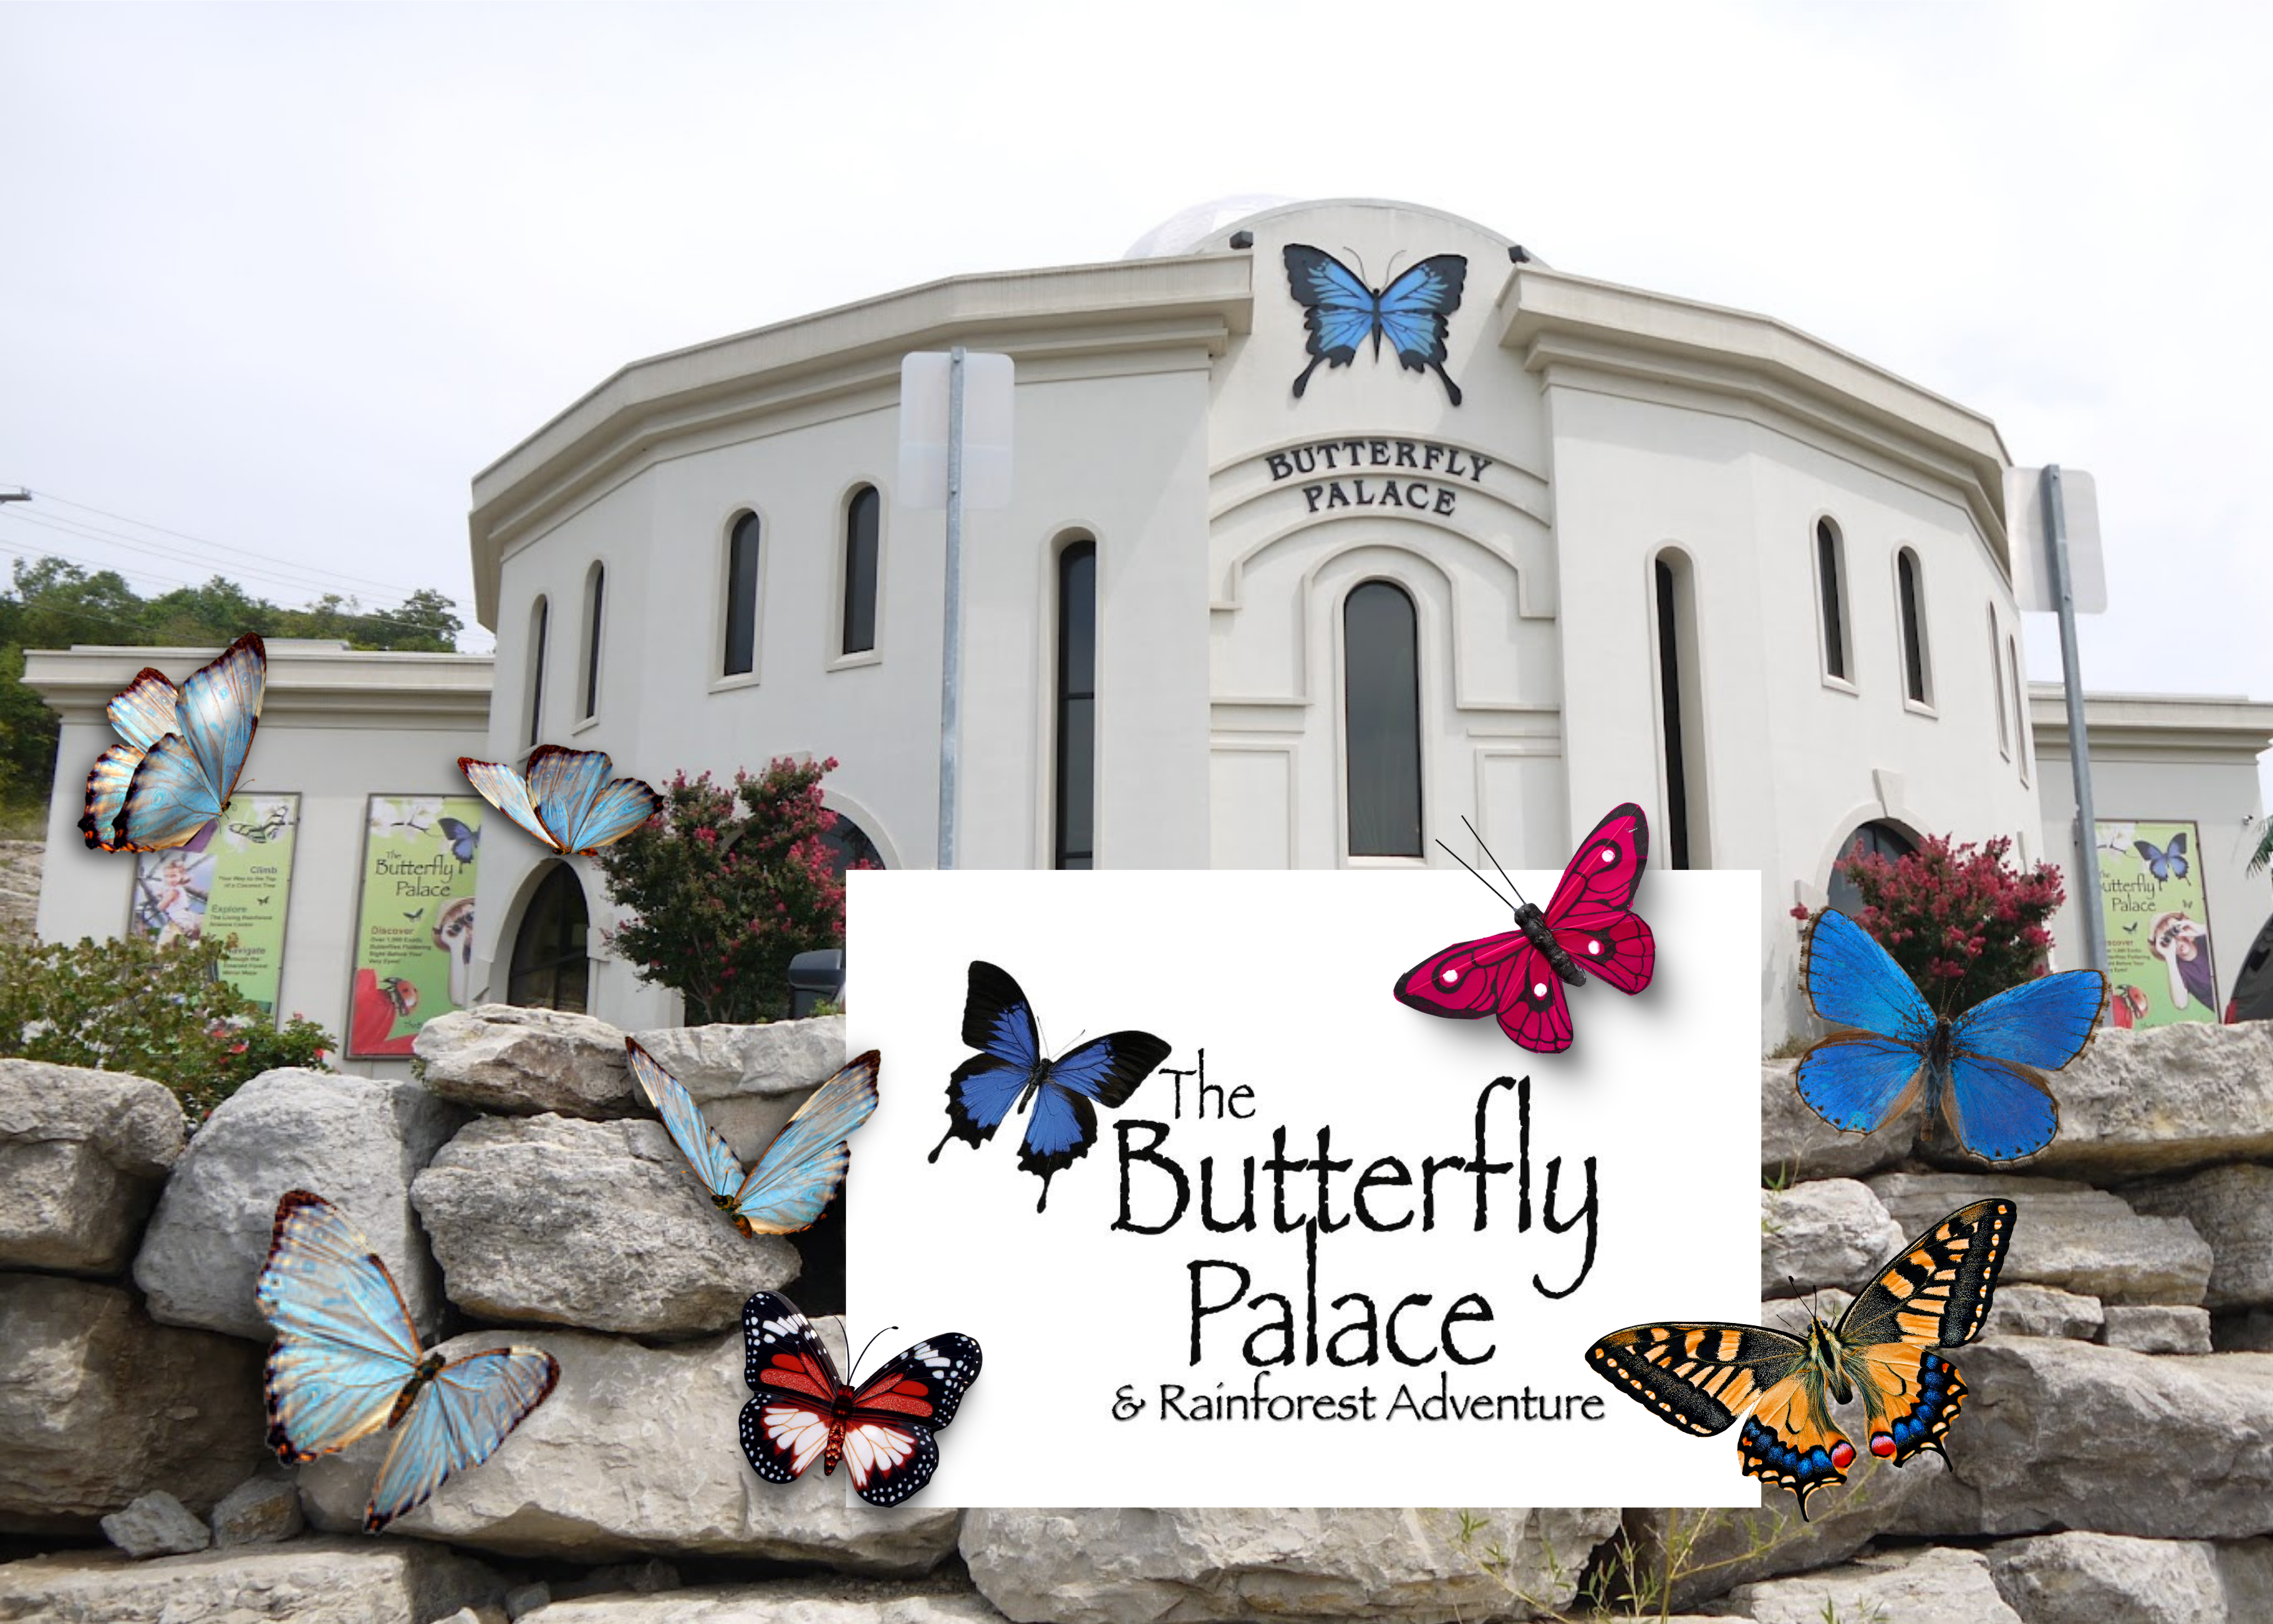 there are many colorful butterflies on the rocks